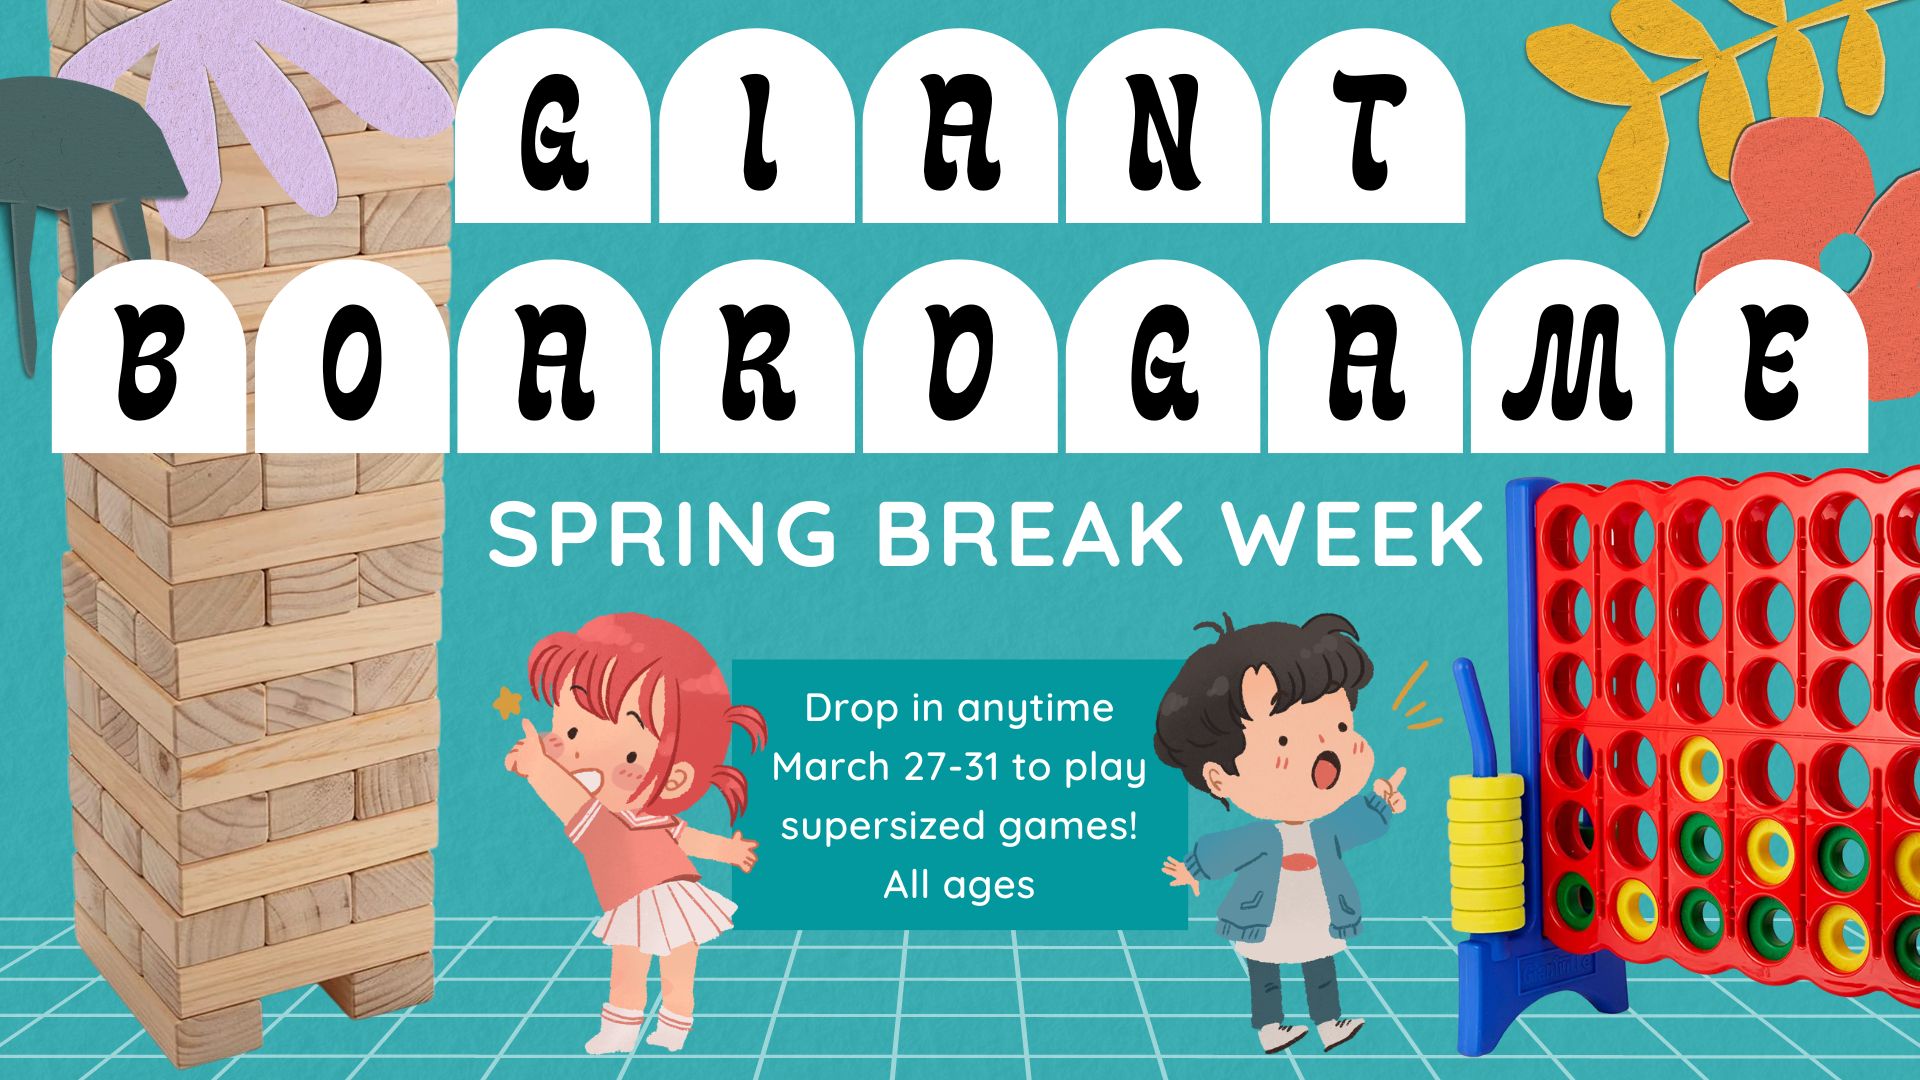 Image of Two children, one pointing to a giant Jenga game, and the other pointing to a giant Connect  4 game.   Text reads:  Giant Board Game Spring Break Week. Drop in any time.  march 27-31 to play supersized games! All ages.